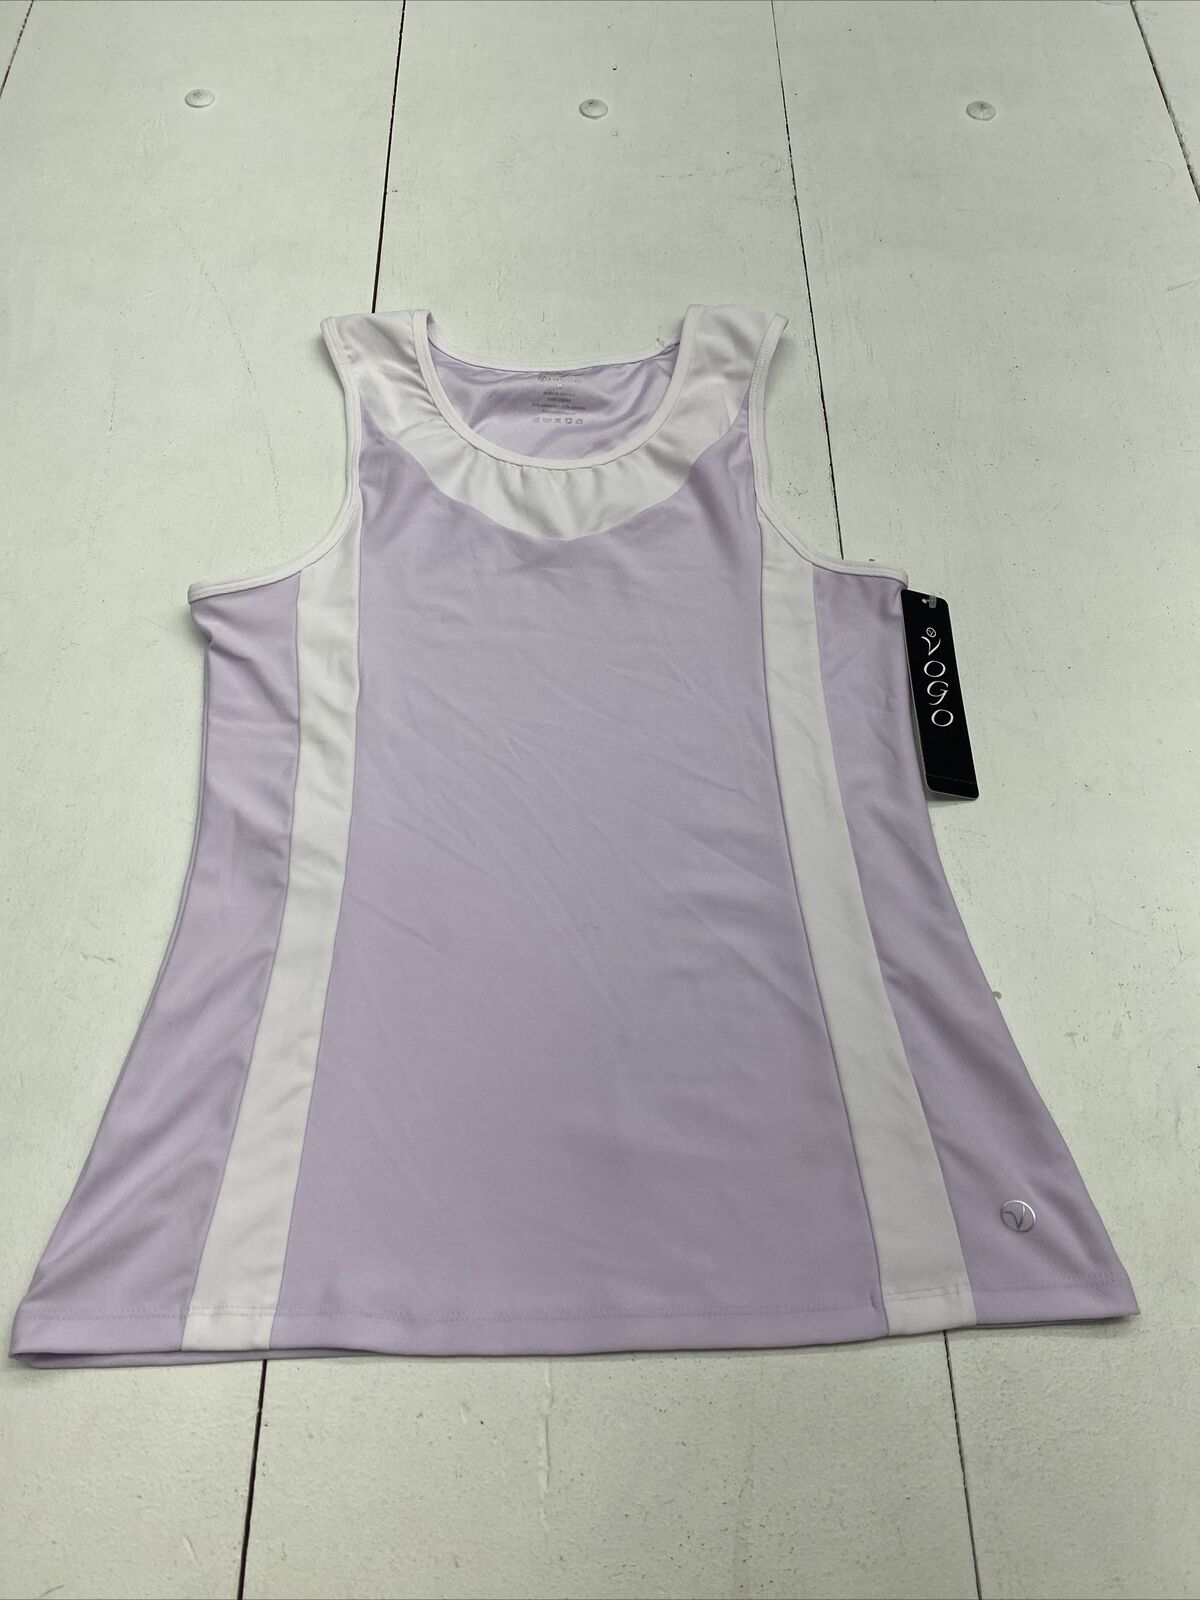 VOGO Athletica Activewear Tank Top Lilly Purple Womens Size Medium New